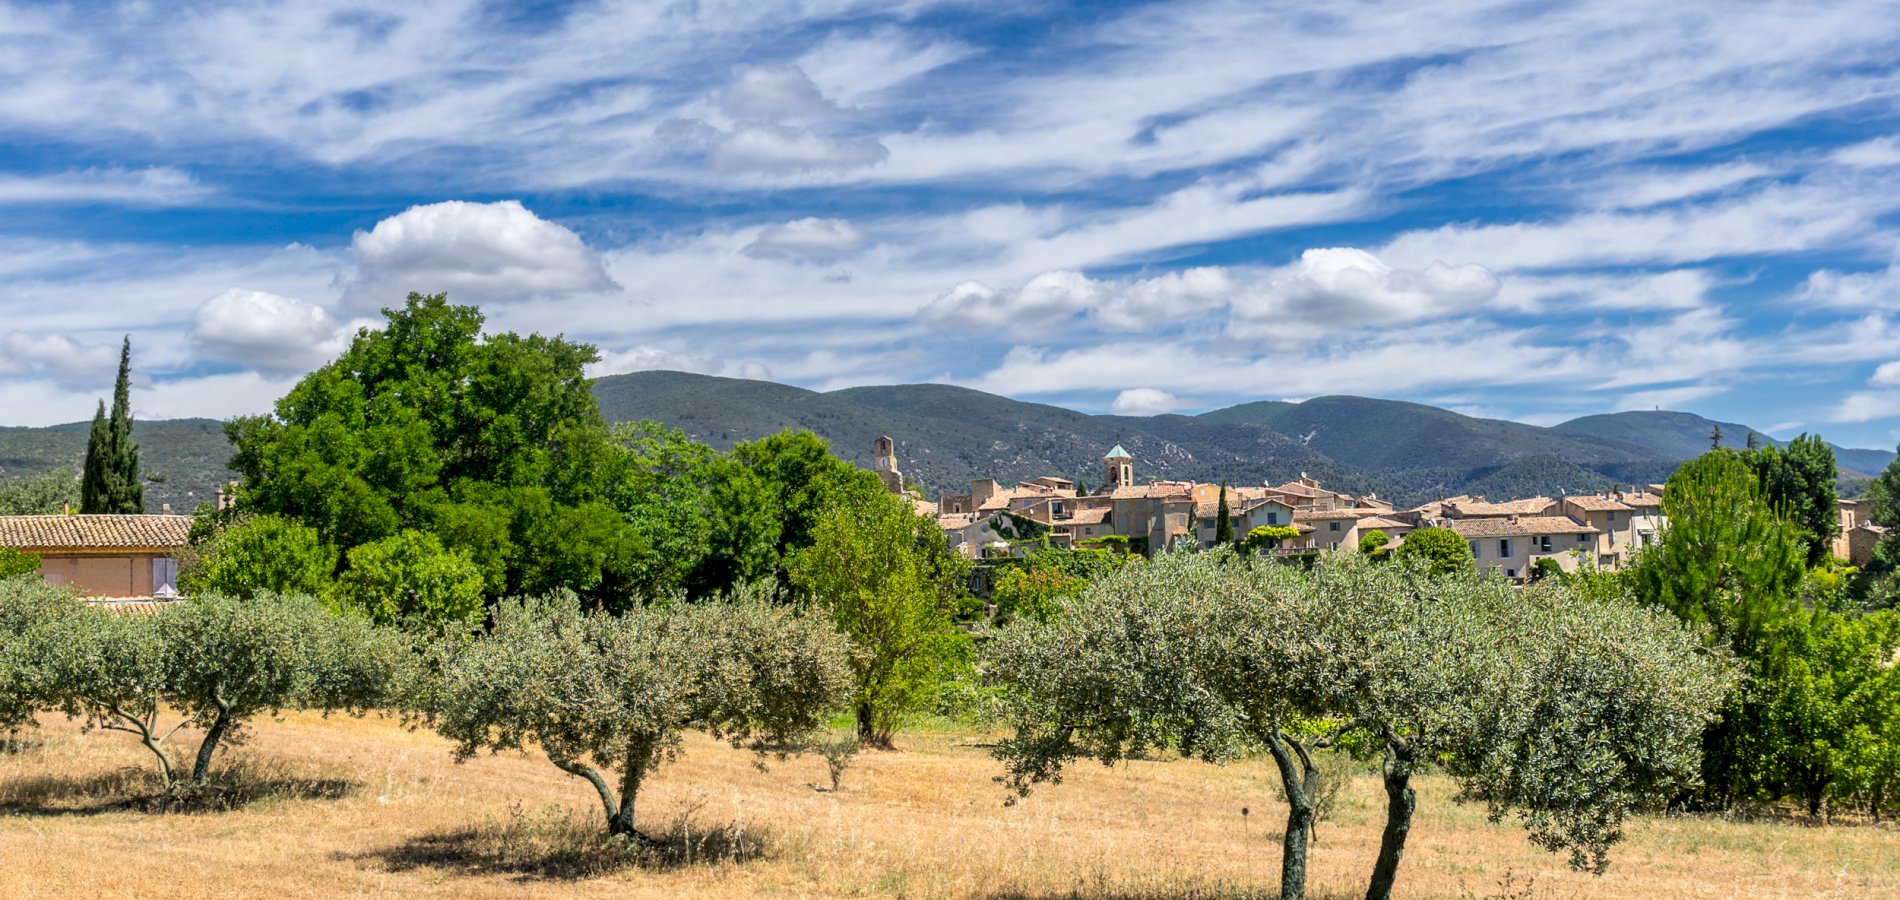 Ophorus Tours - A Private Half Day Trip from Aix en Provence to Luberon Villages